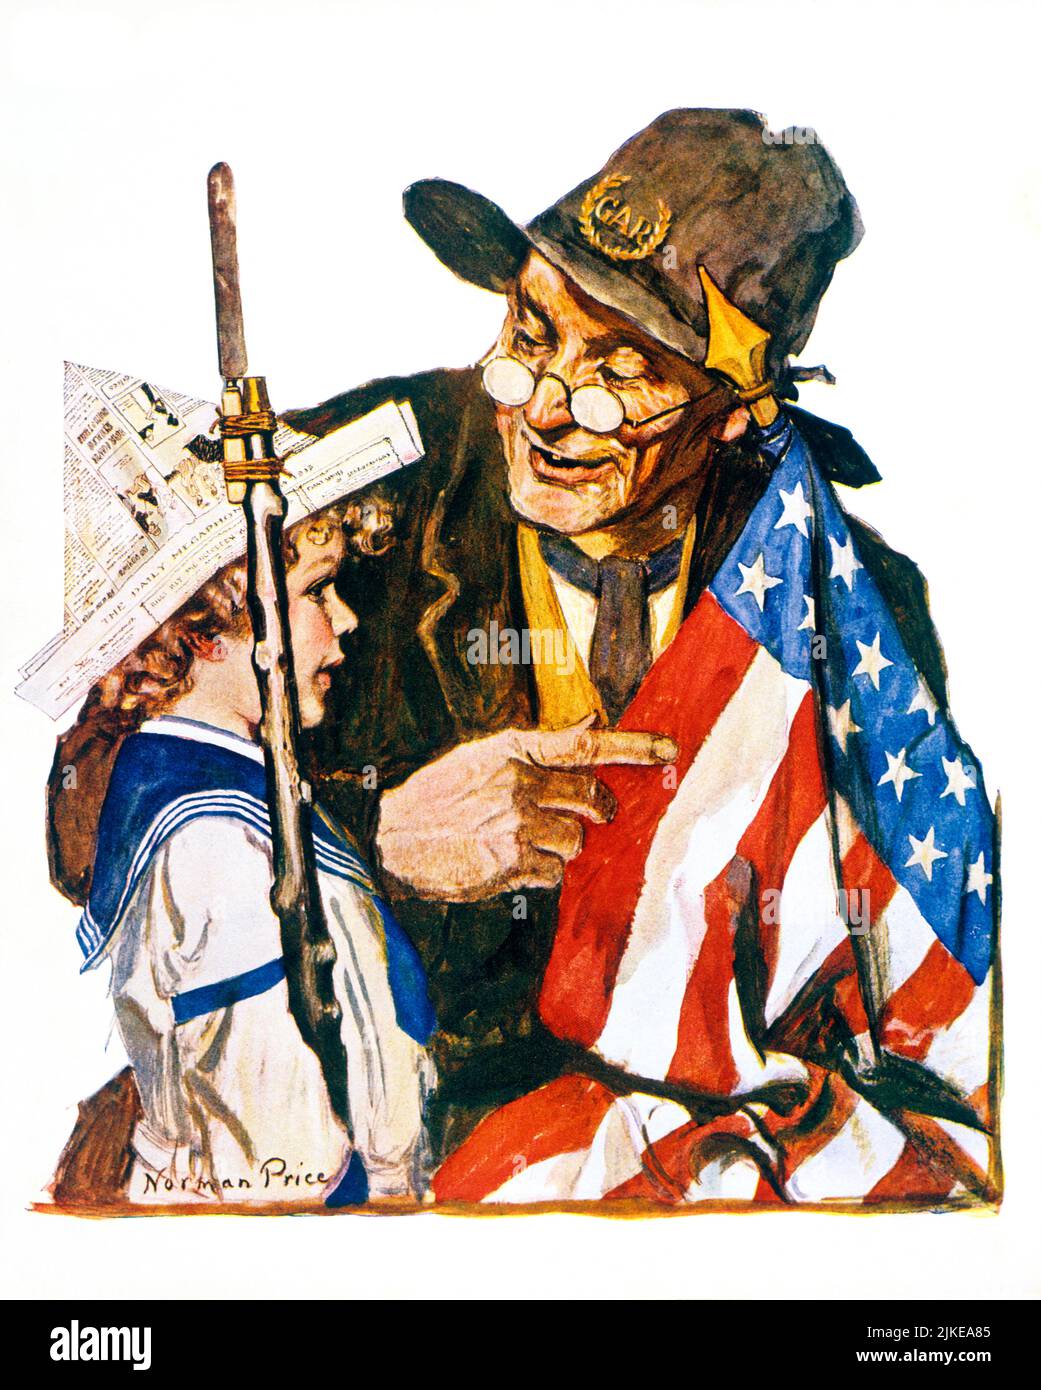 1910s OLD VETERAN OF GRAND ARMY OF REPUBLIC TELLS STOTRY OF USA FLAG TO YOUNG BOY PAINTING FOR COVER OF LIFE BY NORMAN PRINCE - kh13563 NAW001 HARS STORY INDOORS NOSTALGIC SYMBOL PAIR COLOR SENIORS SOLDIERS OLD TIME NOSTALGIA OLD FASHION 1 JUVENILE STYLE COMMUNICATION FLAGS GENERATIONS GUNS BATTLE GRAND GRANDPARENTS JOY LIFESTYLE COVER CONFLICT CELEBRATION ELDER GRANDPARENT NAVY HOME LIFE HALF-LENGTH PERSONS INSPIRATION MALES RISK WARS DREAMS HAPPINESS OLD AGE OLDSTERS HEAD AND SHOULDERS OLDSTER ADVENTURE STRENGTH VICTORY COURAGE CHOICE EXCITEMENT KNOWLEDGE POWERFUL REPUBLIC PRIDE TELLING Stock Photo